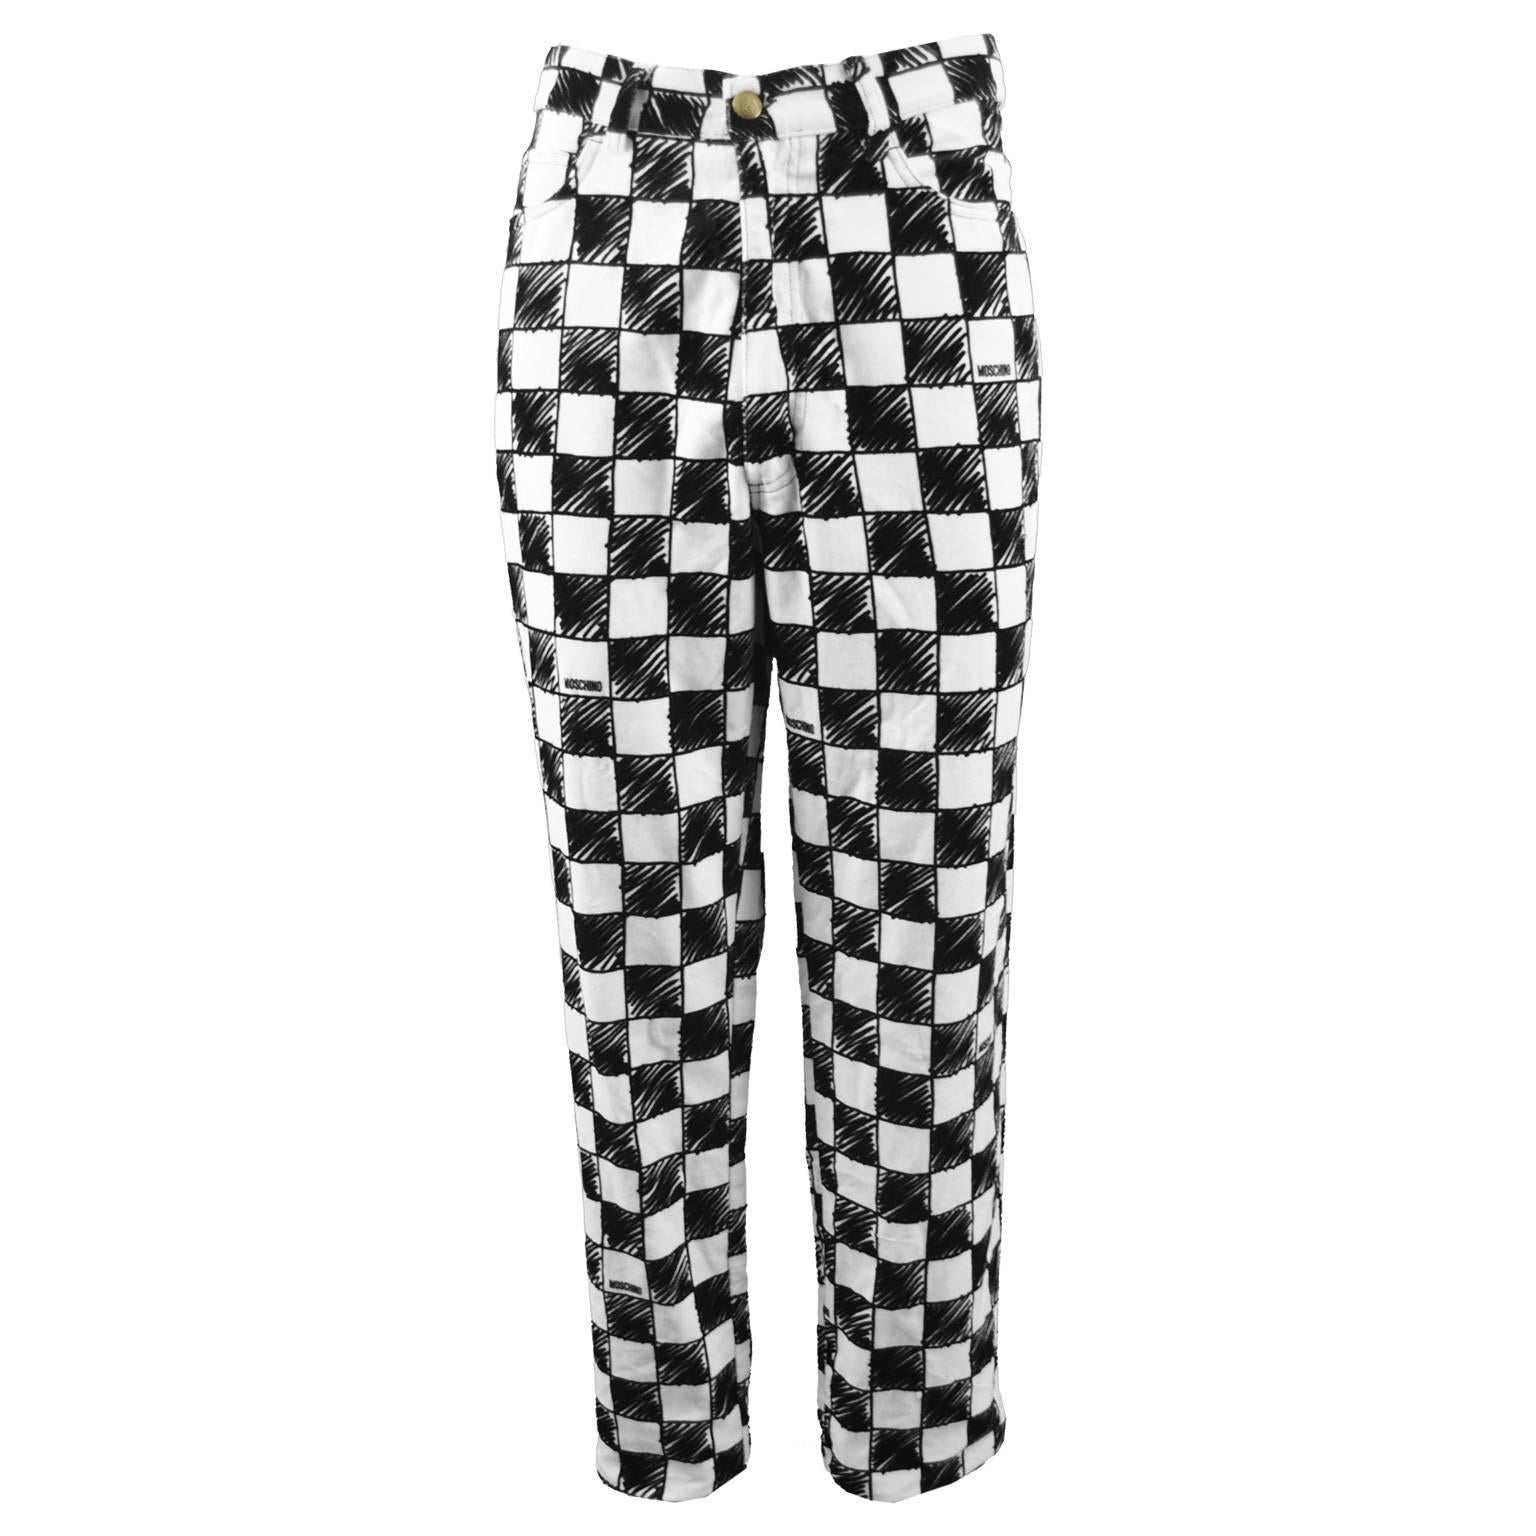 Moschino Men's Vintage Black and White Velvet Checkerboard Print Pants, 1990s For Sale